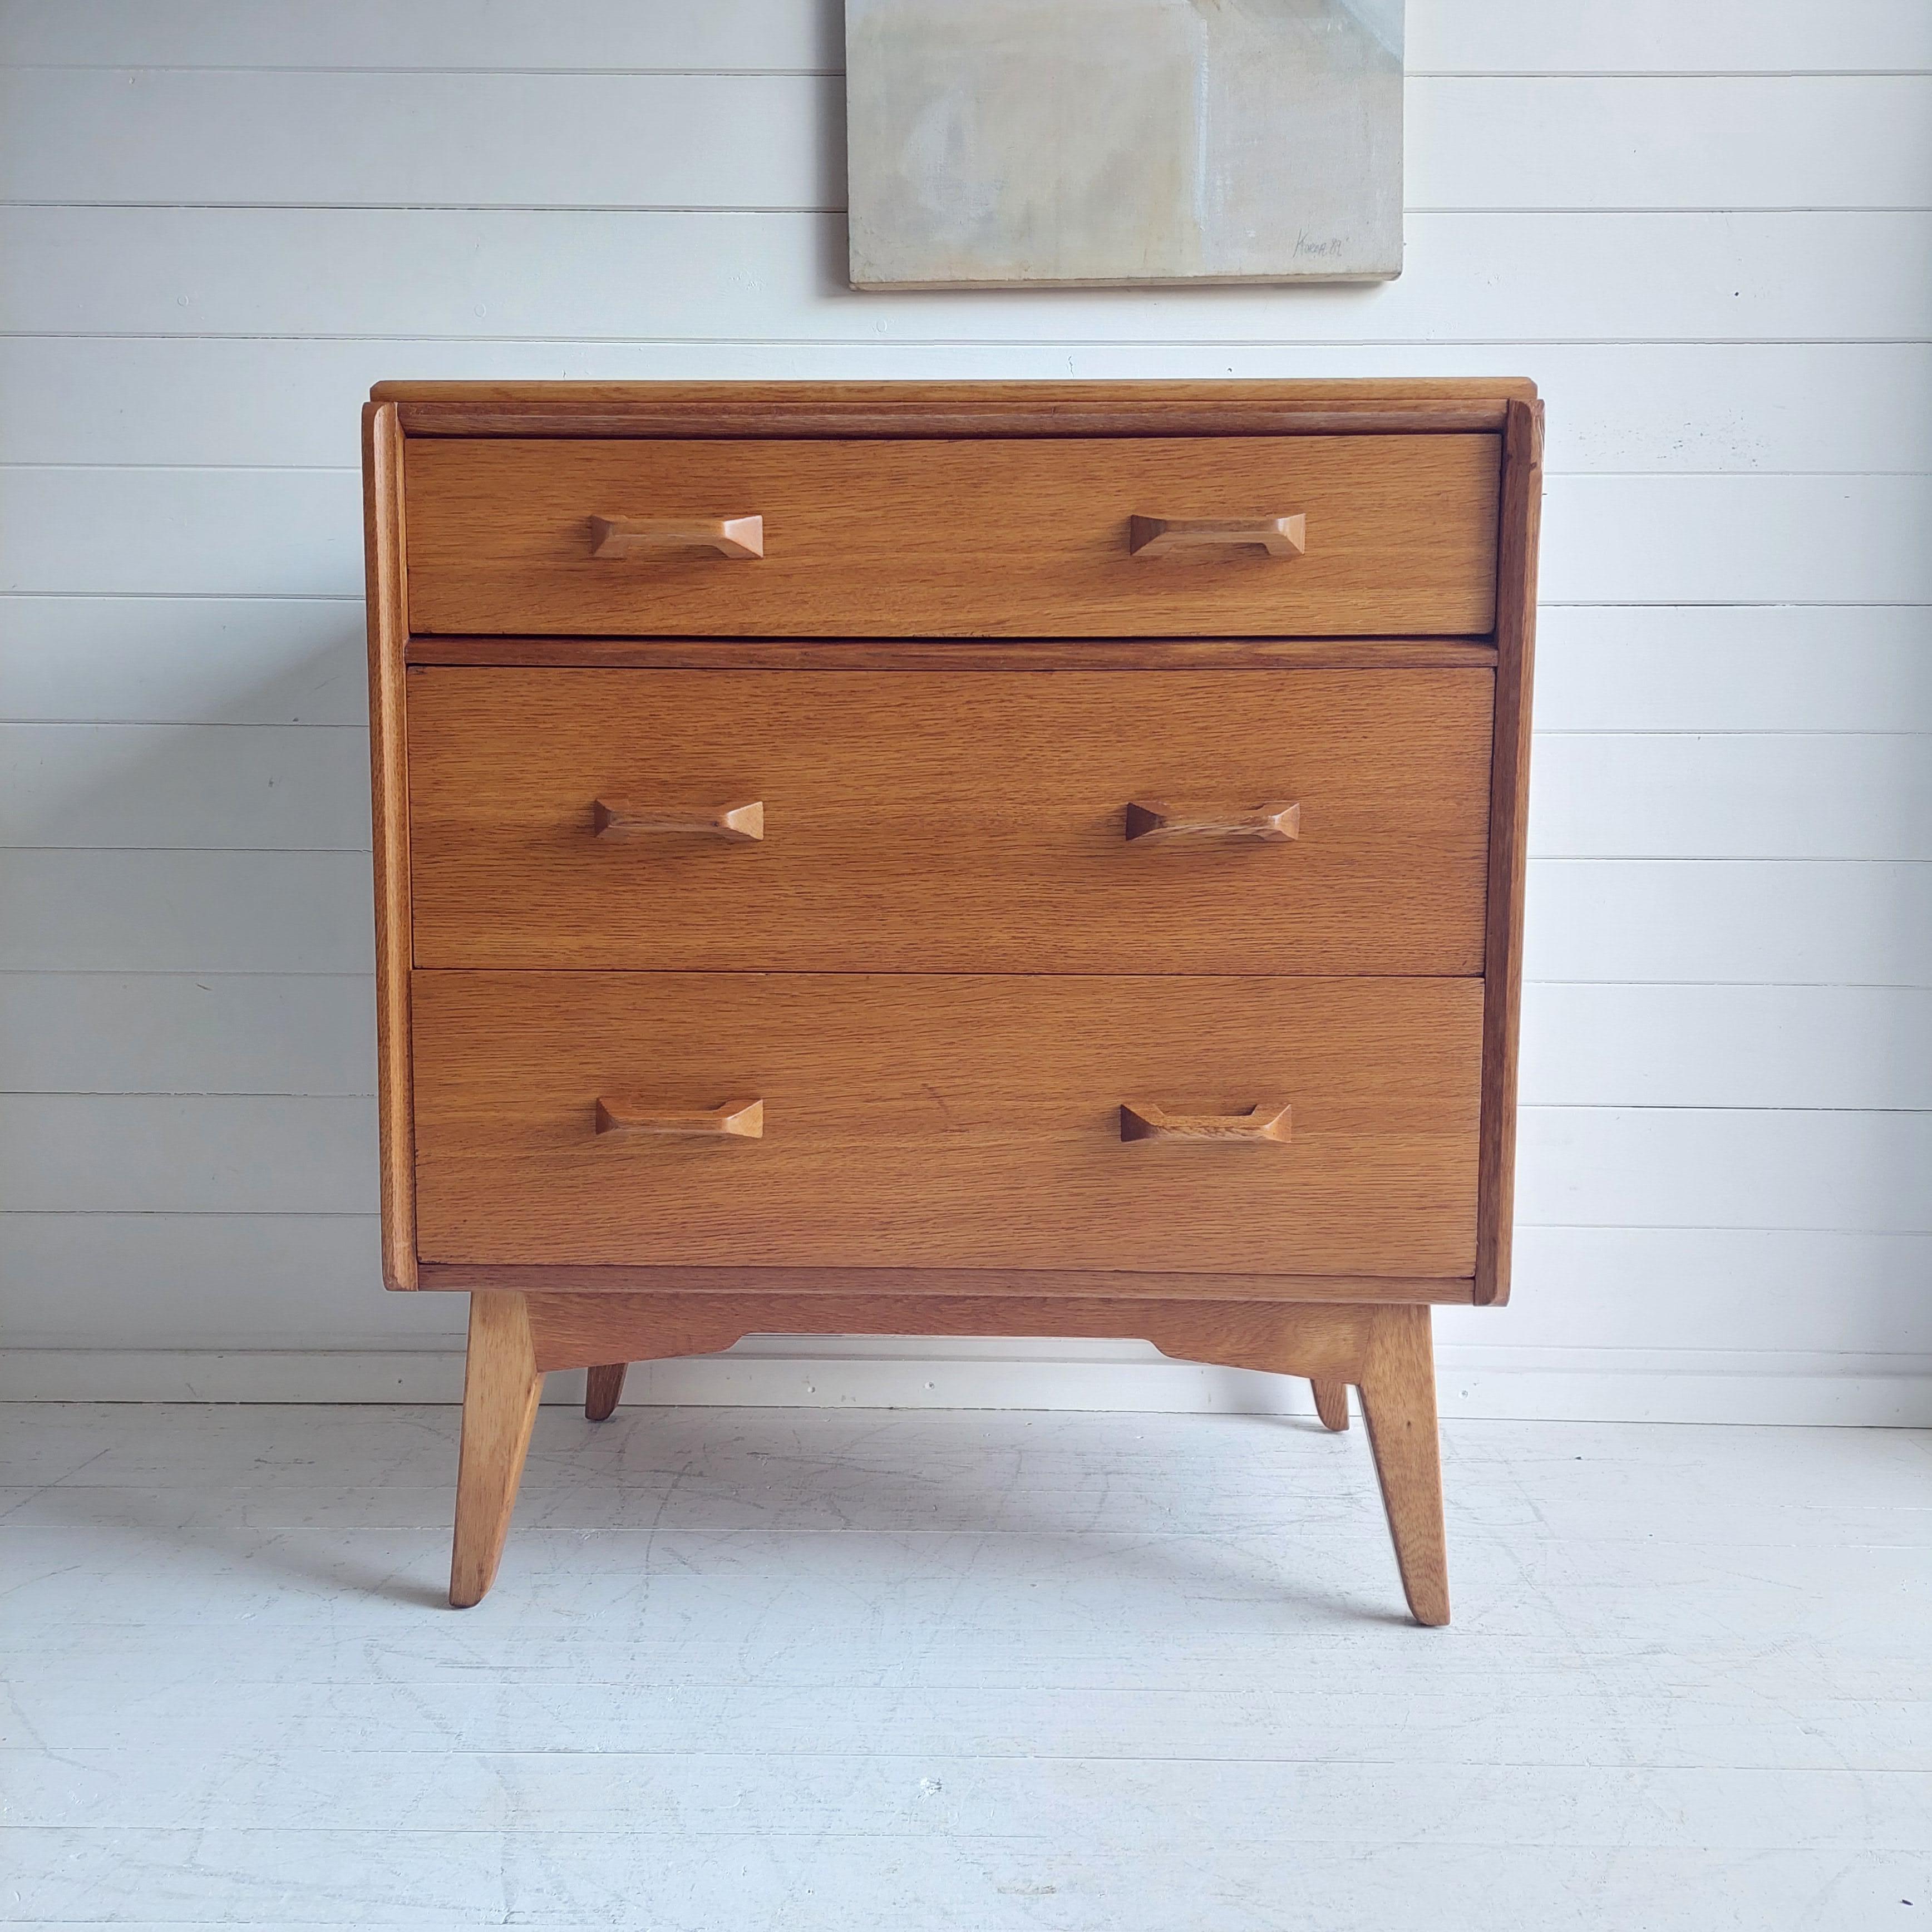 This particular piece is from the 'Brandon' range designed by V.B Wilkins who stated that these pieces of furniture had a look that could be placed in any room of the house and not look out of place.
A set of oak G Plan E Gomme drawers from the